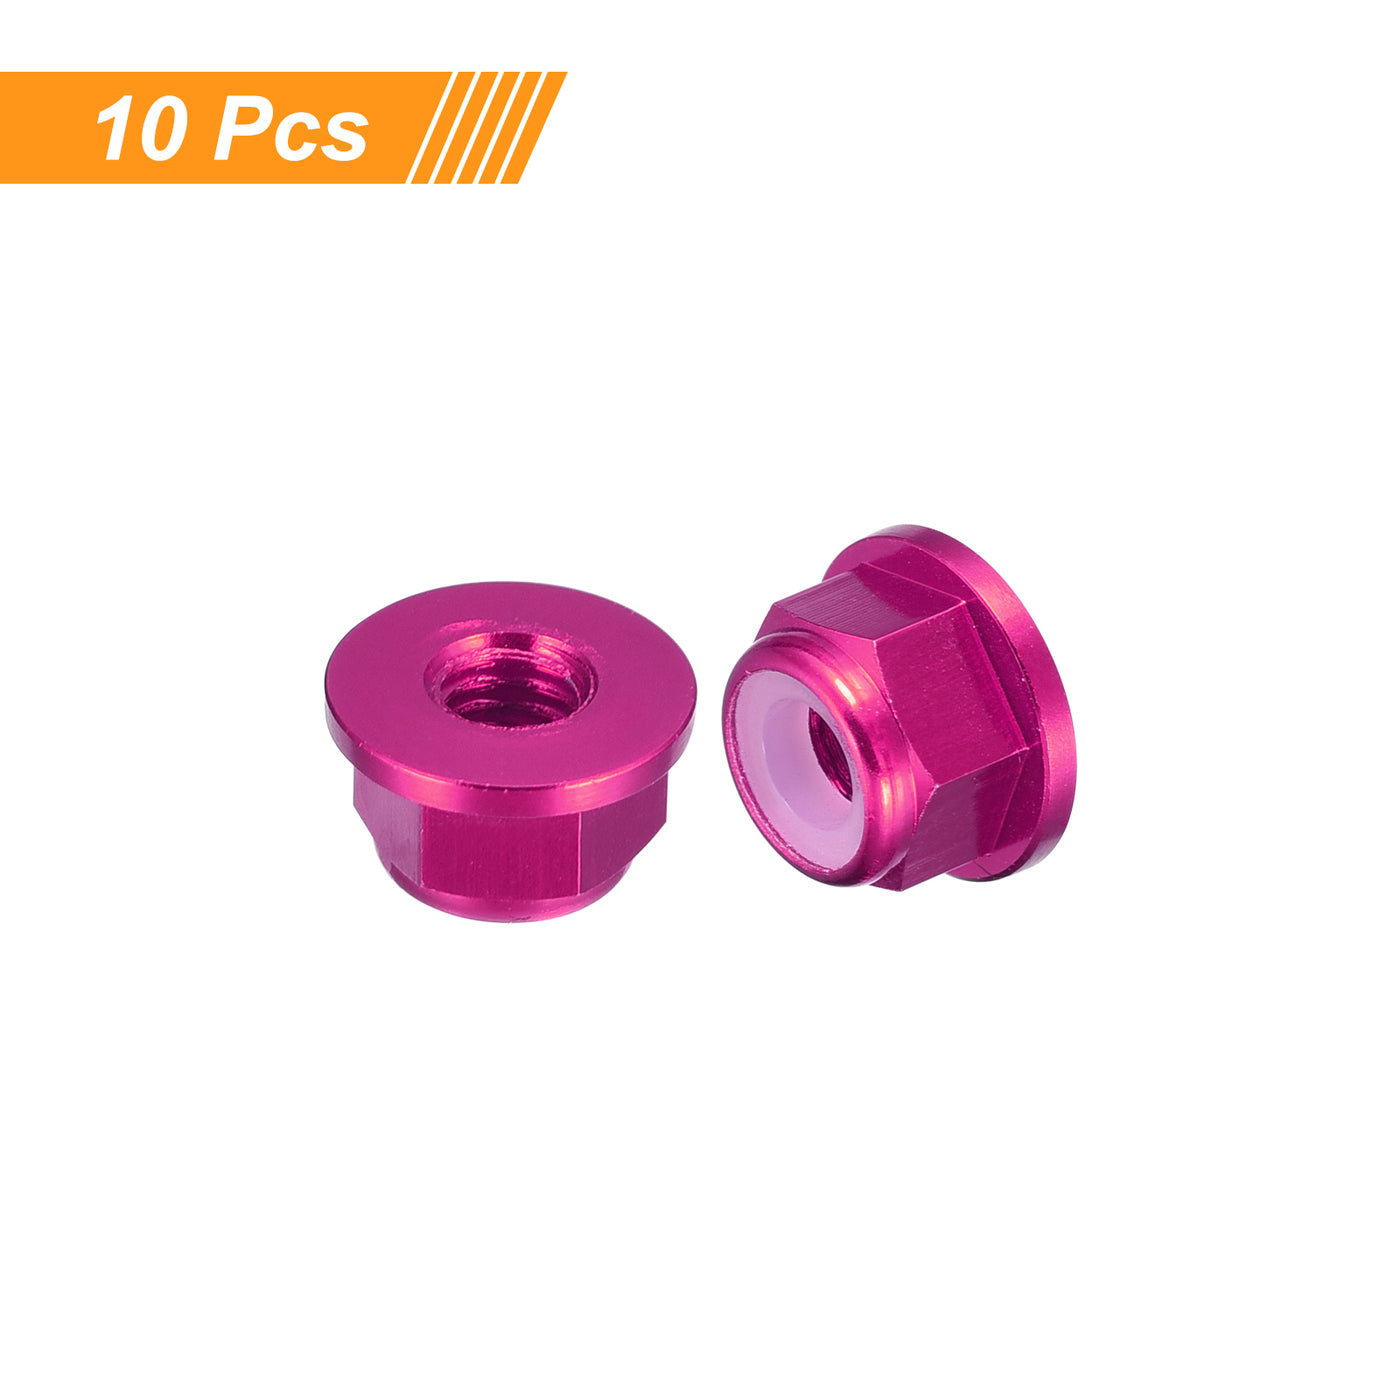 uxcell Uxcell Nylon Insert Hex Lock Nuts, 10pcs - M5 x 0.8mm Aluminum Alloy Self-Locking Nut, Anodizing Flange Lock Nut for Fasteners (Pink)